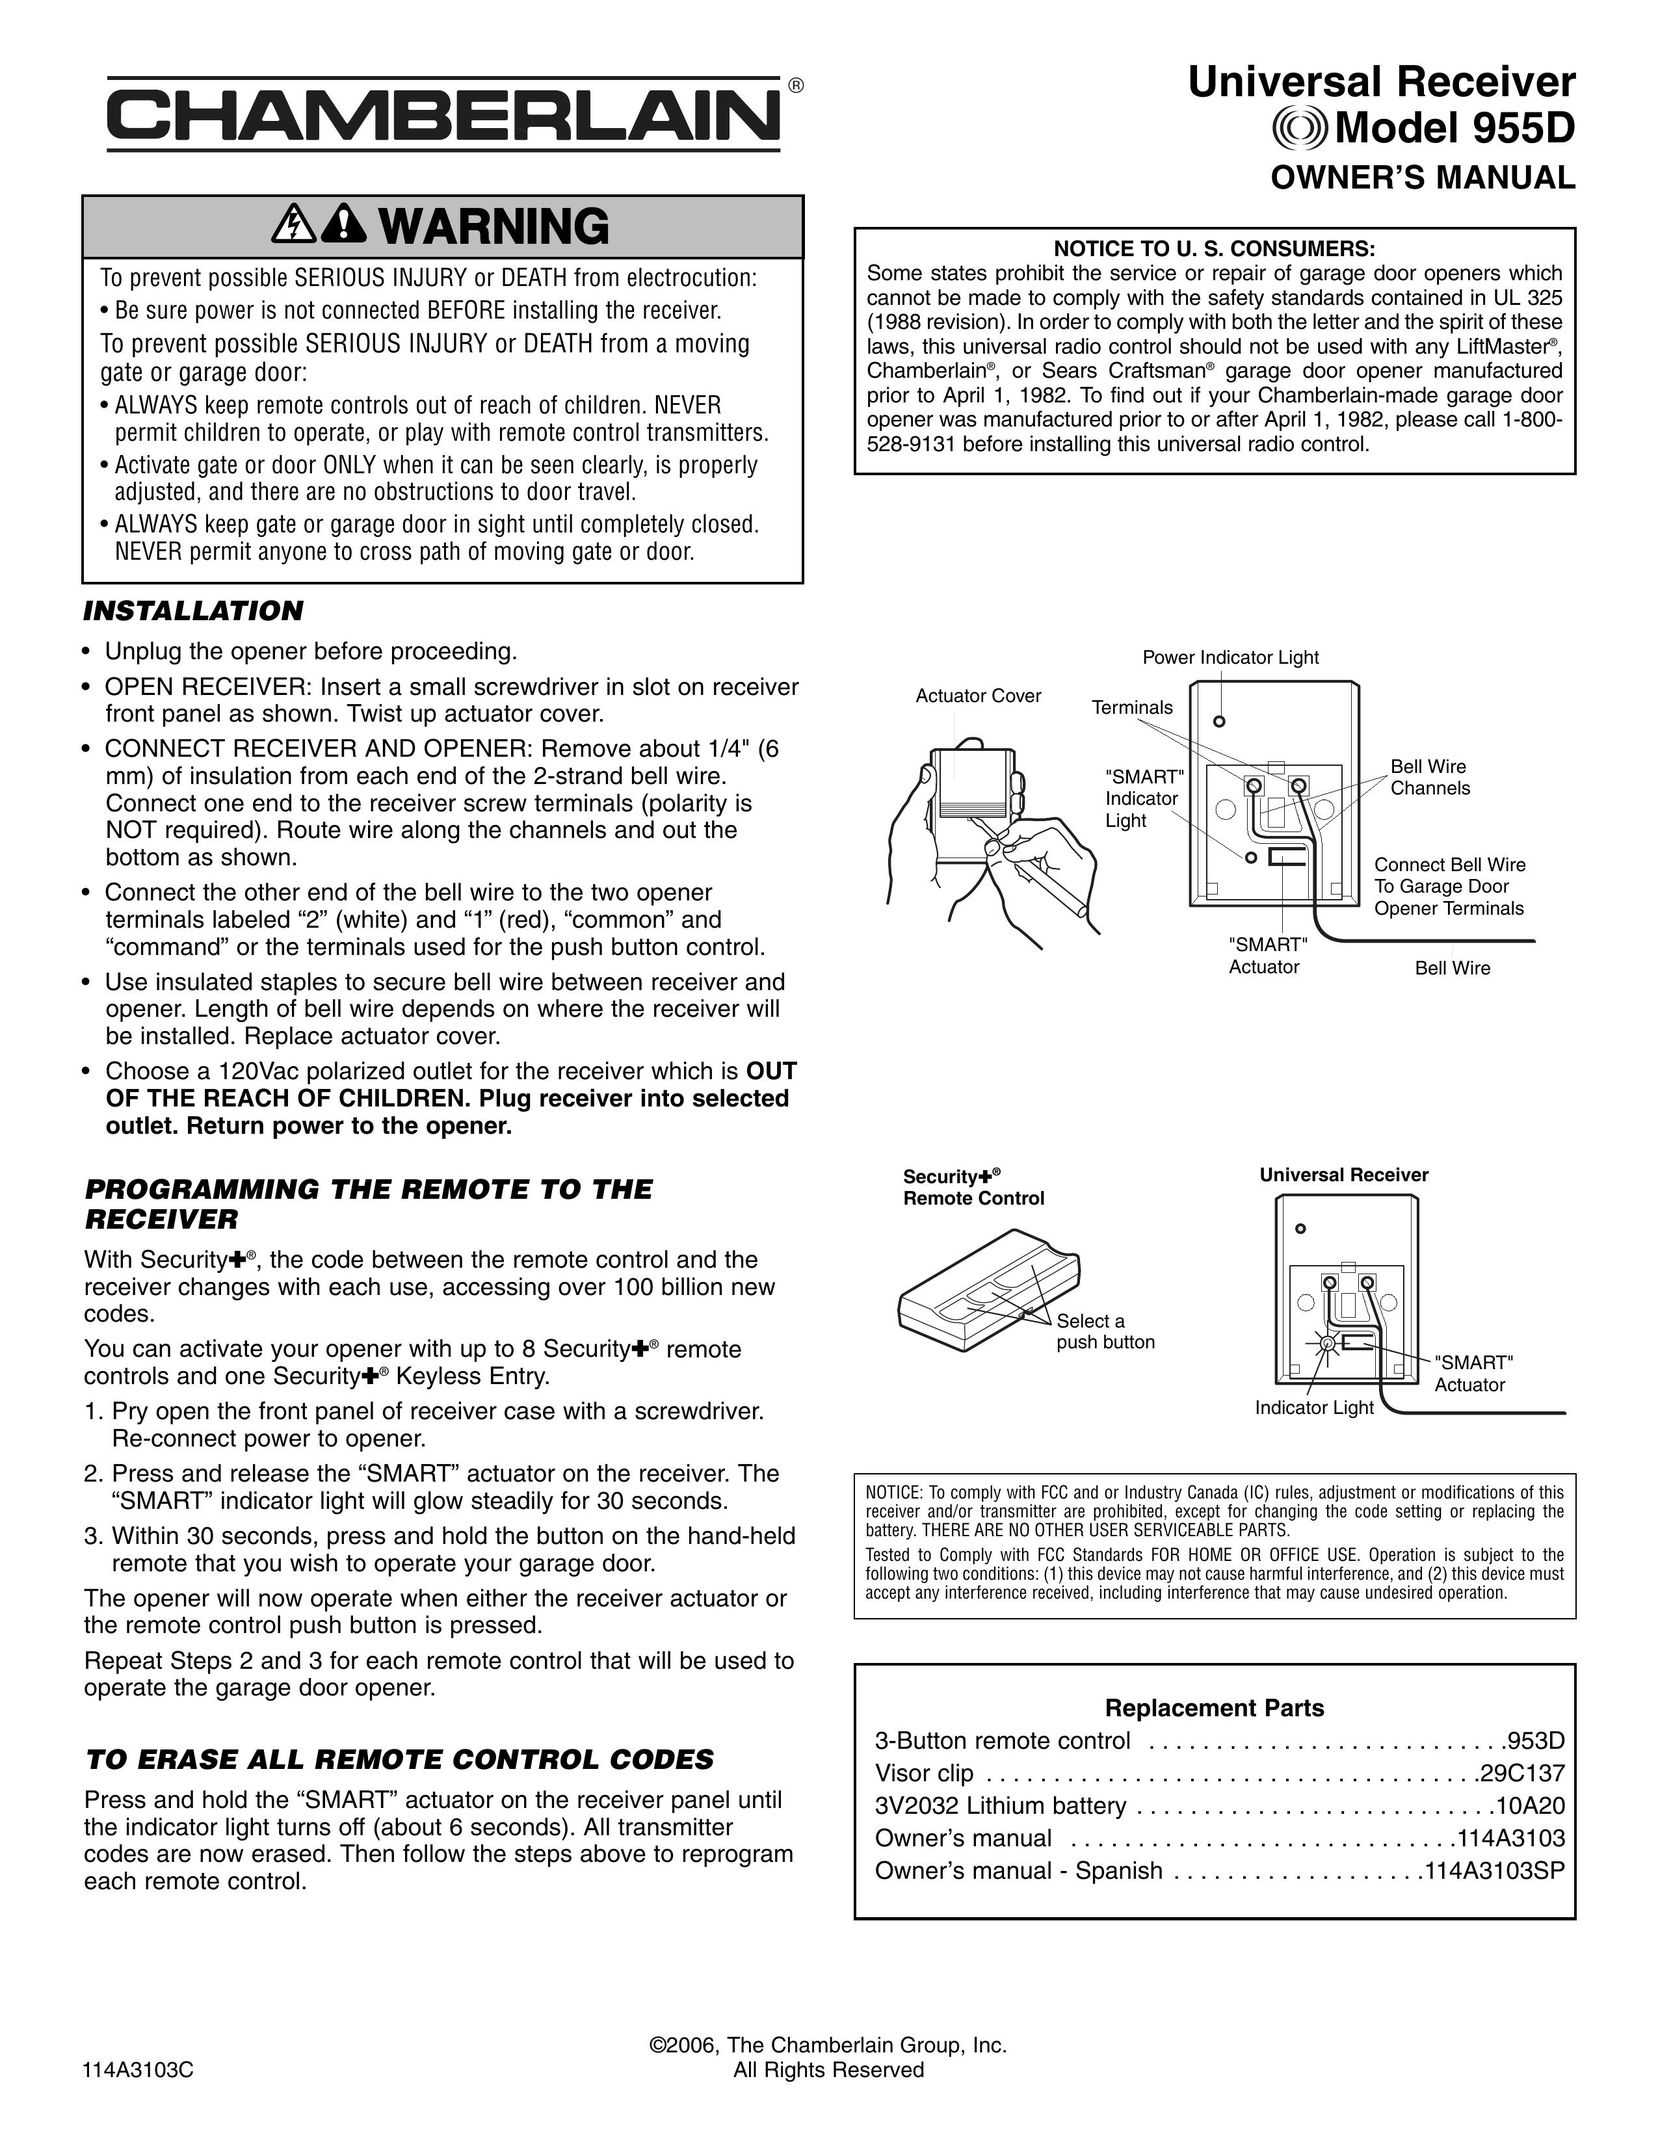 Chamberlain 955D Home Security System User Manual